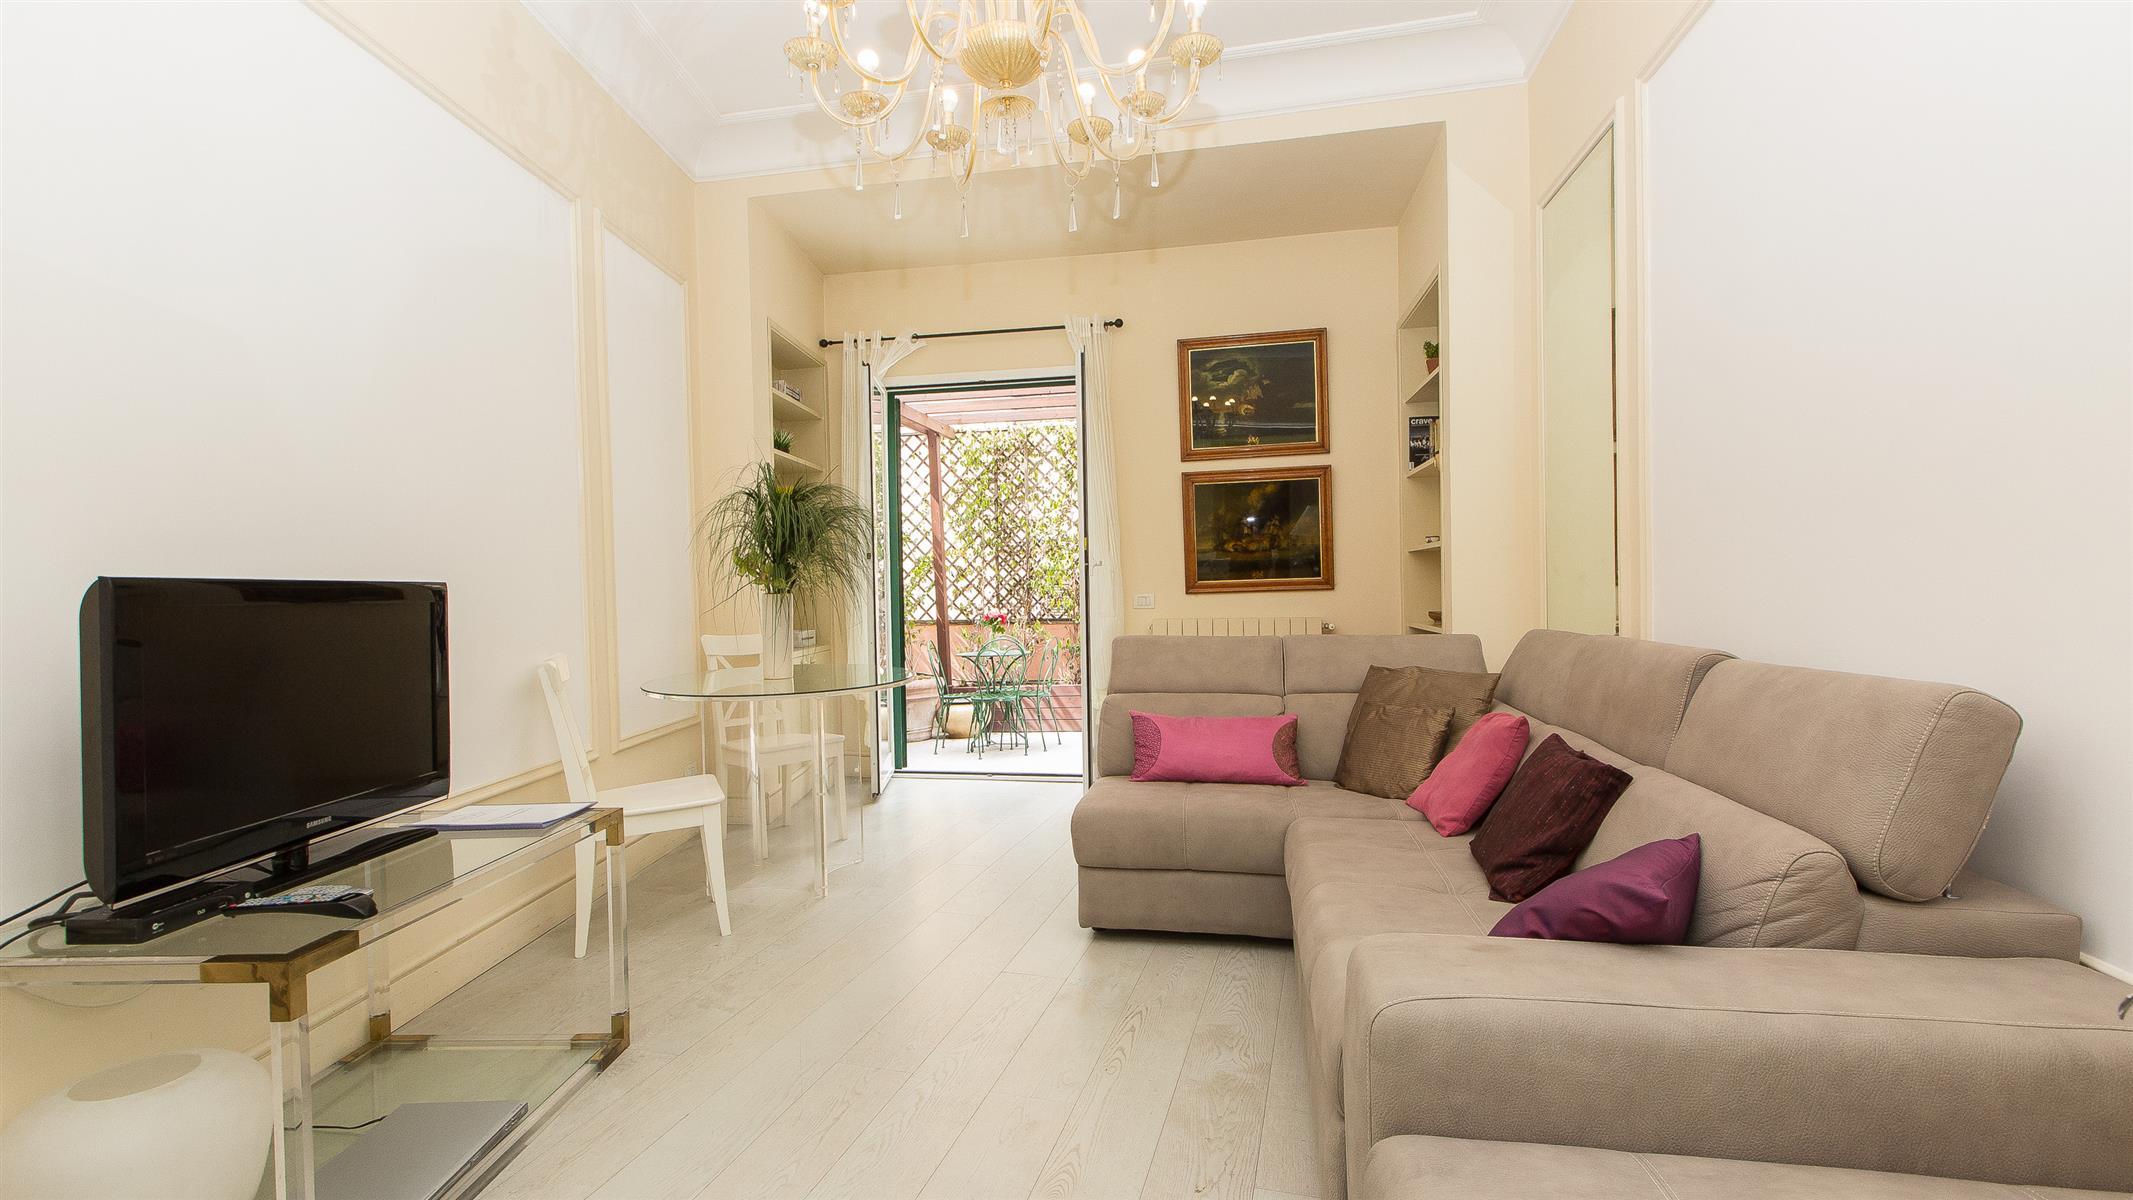 Rent Holiday Apartment with Terrace | Spanish Steps | RentalinRome.com